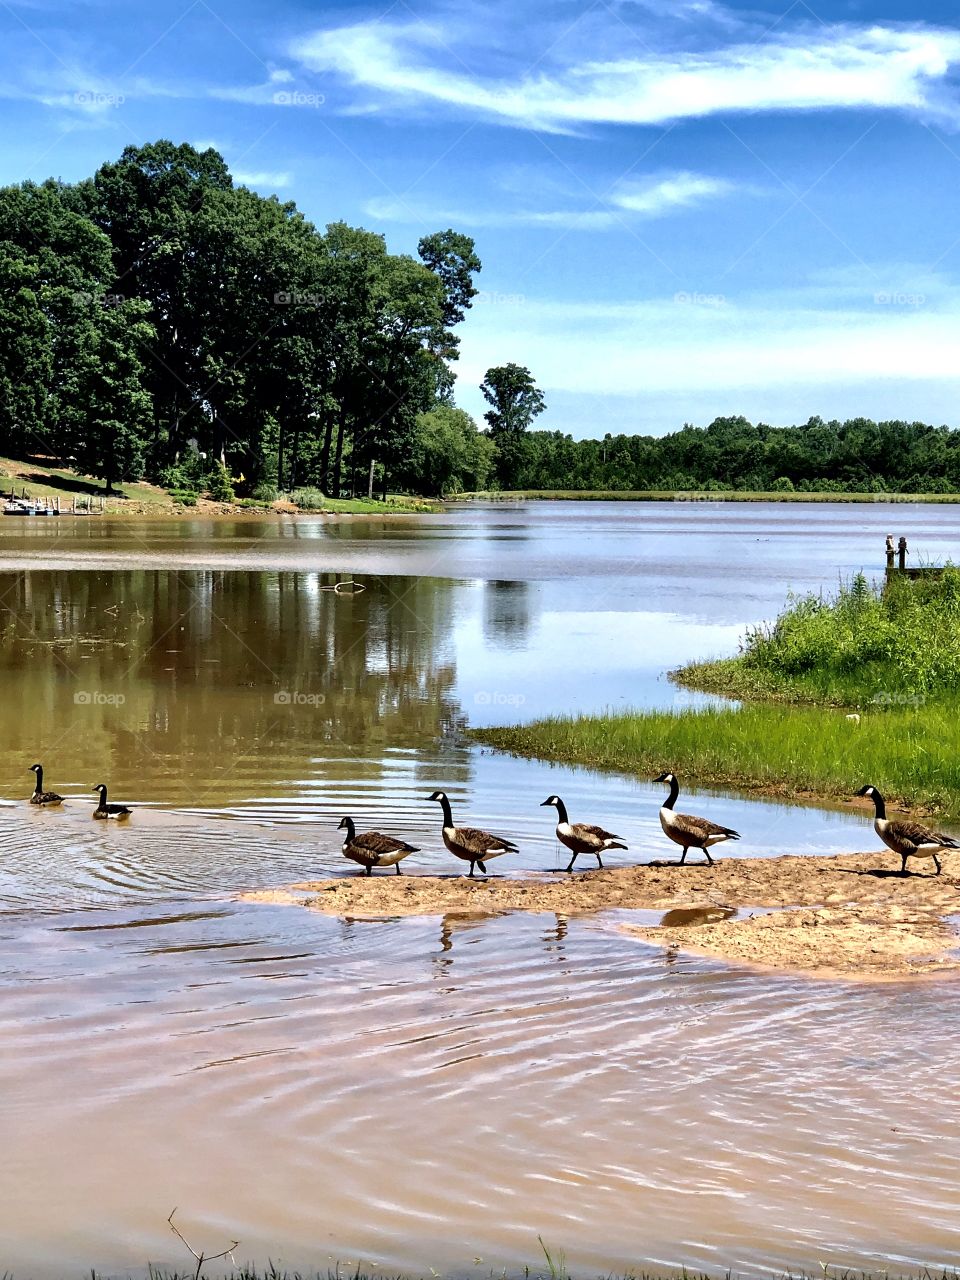 Caught these Canadian geese taking sunbathing and cooling off in our Lake Emory.  I could watch them all day long, so beautiful.